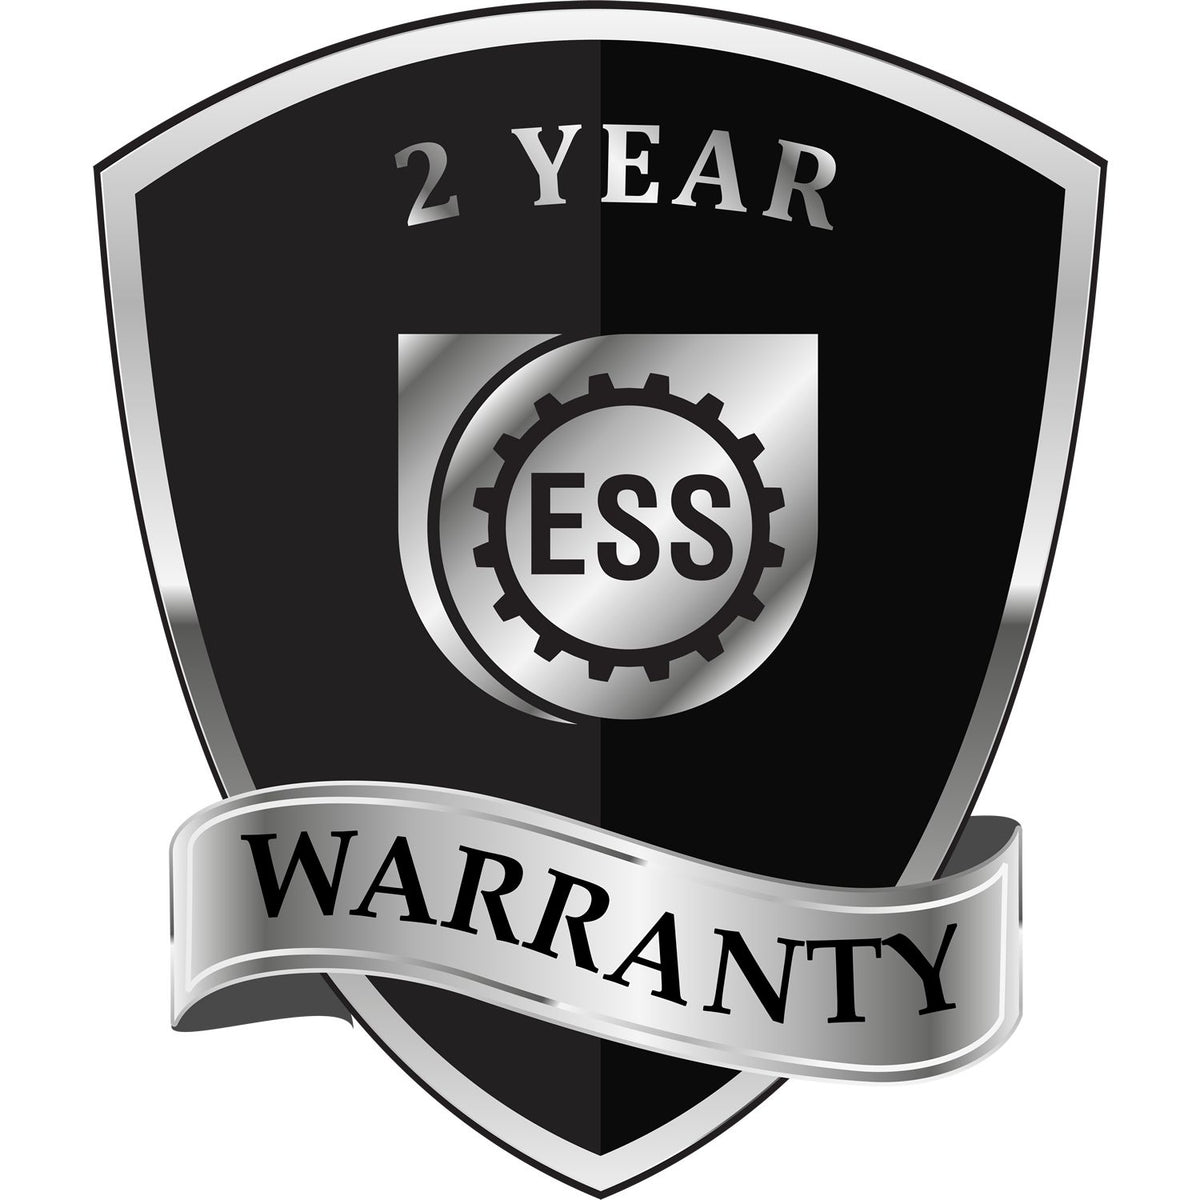 A black and silver badge or emblem showing warranty information for the Hybrid New York Architect Seal